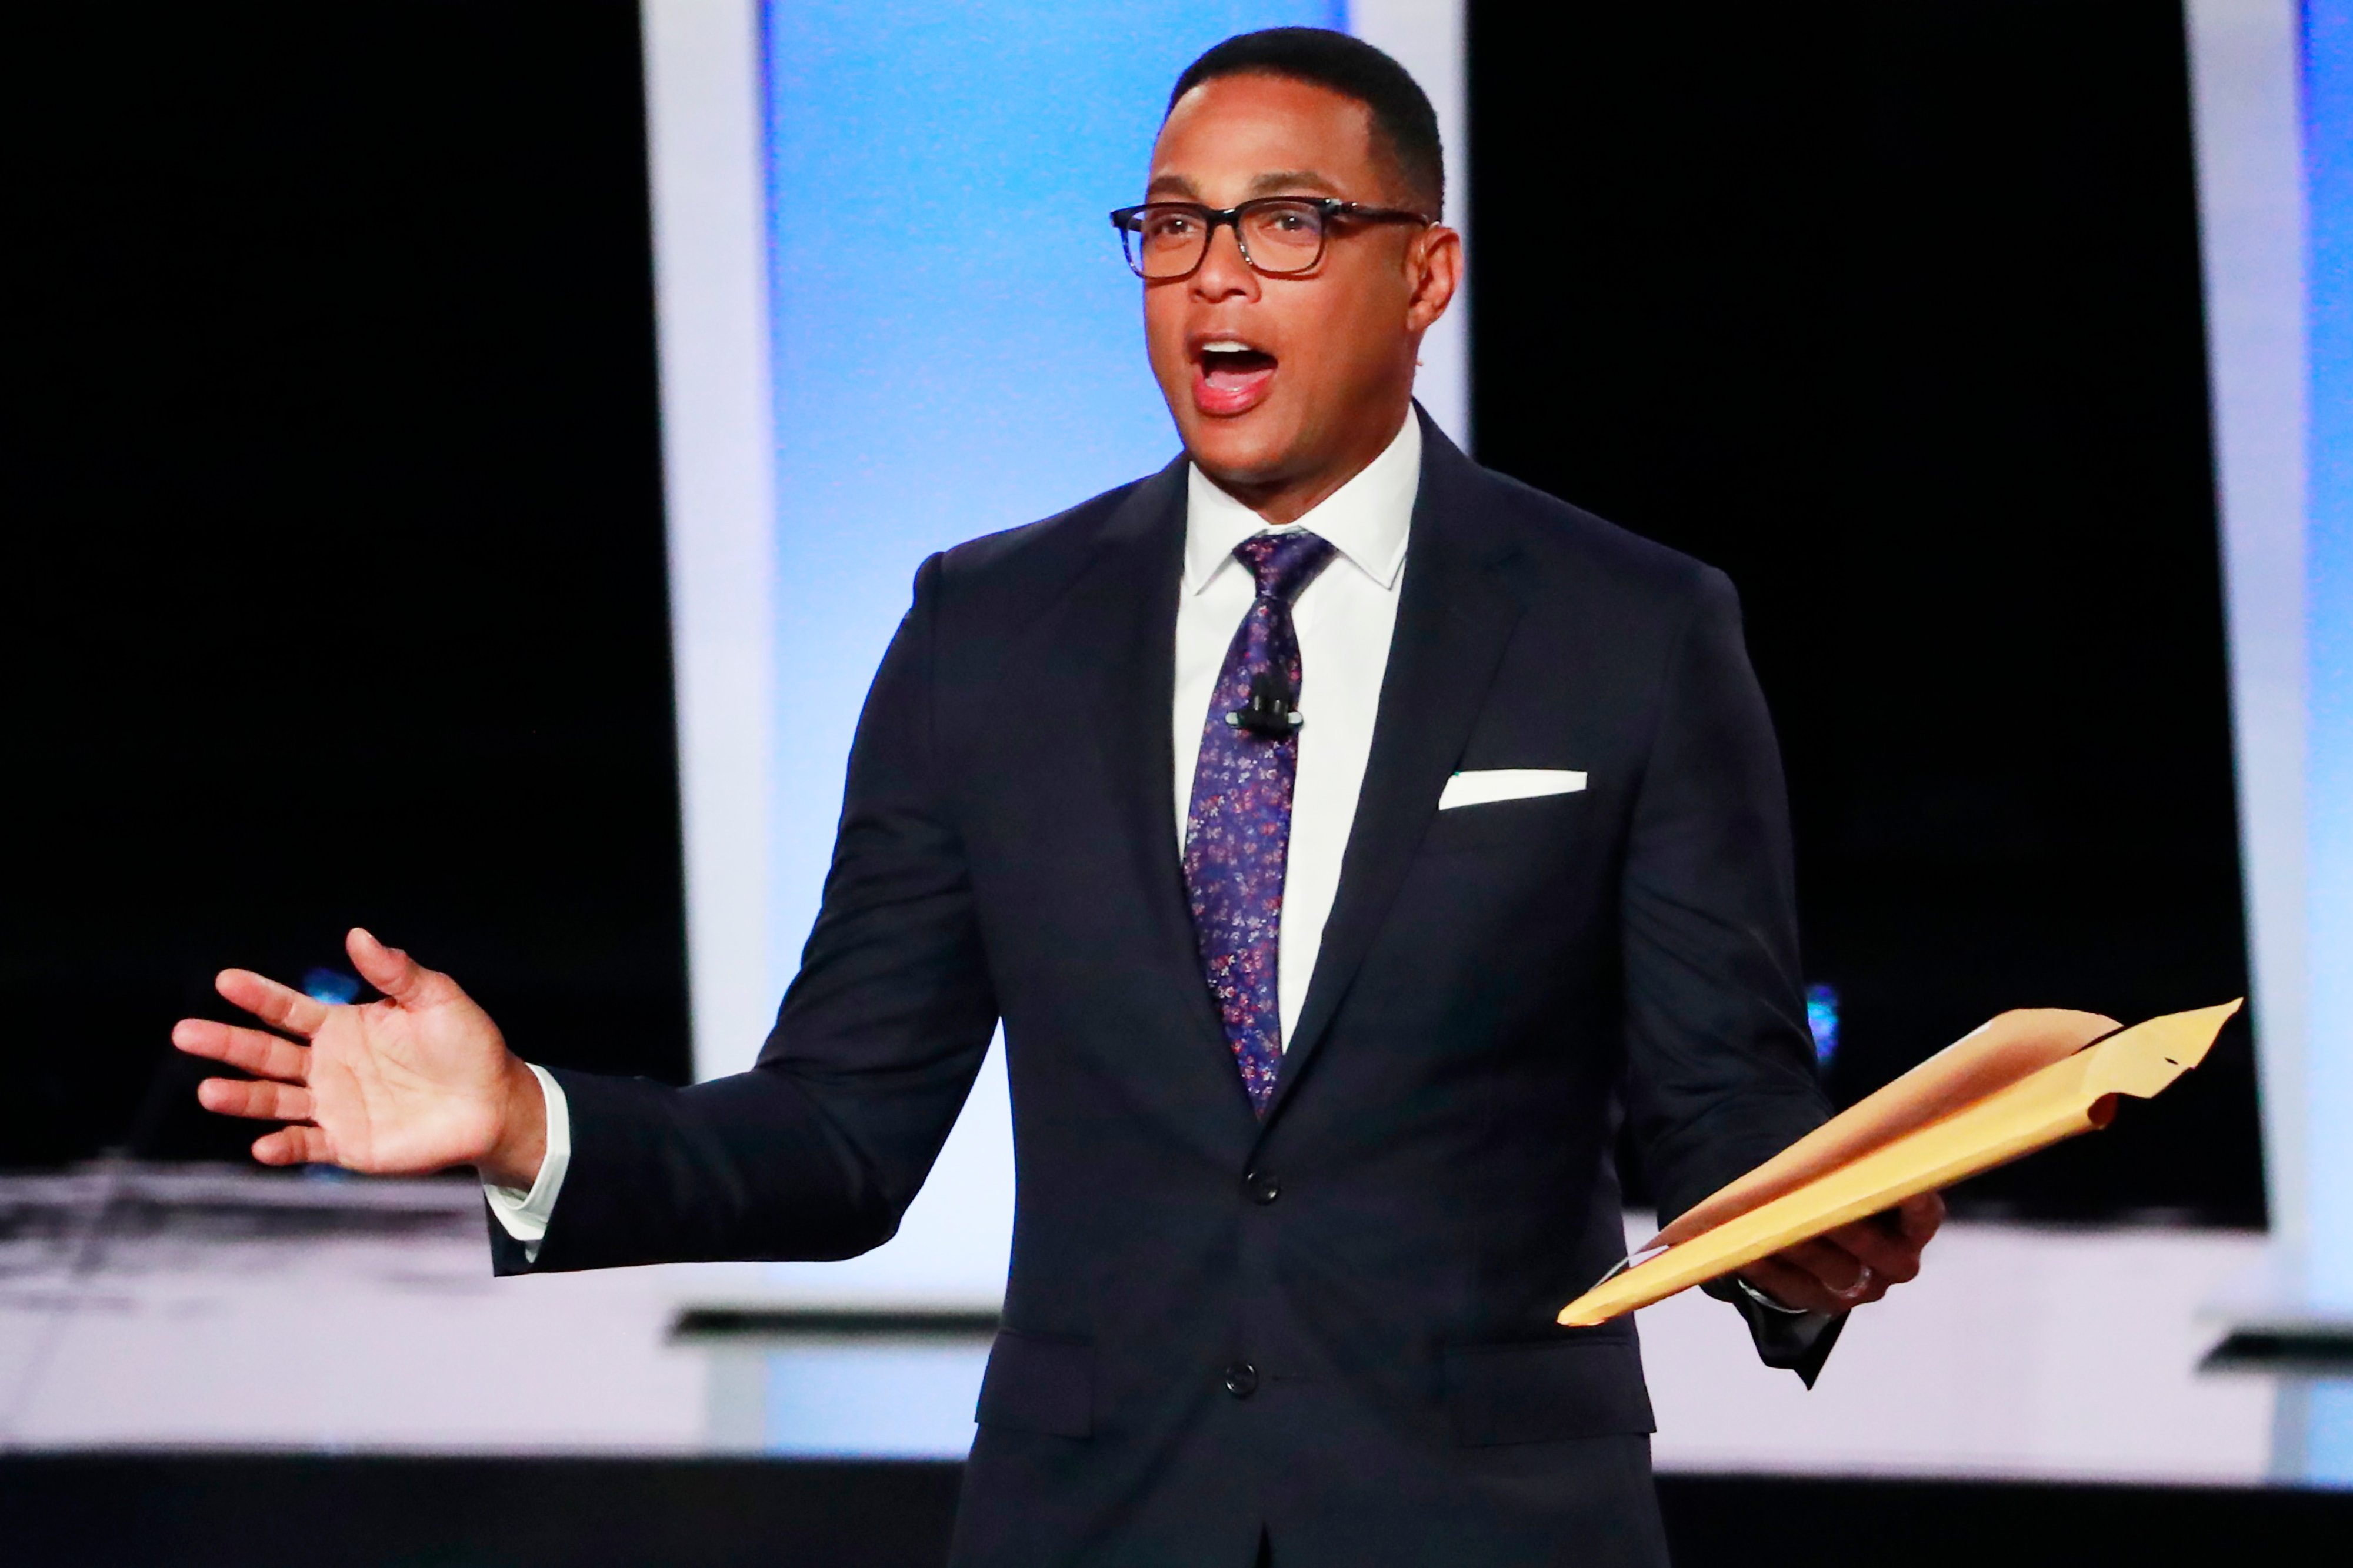 Moderator Don Lemon of CNN speaks to the audience before the start of the second night of the second 2020 Democratic U.S. presidential debate in Detroit, Michigan, July 31, 2019. (REUTERS/Lucas Jackson)